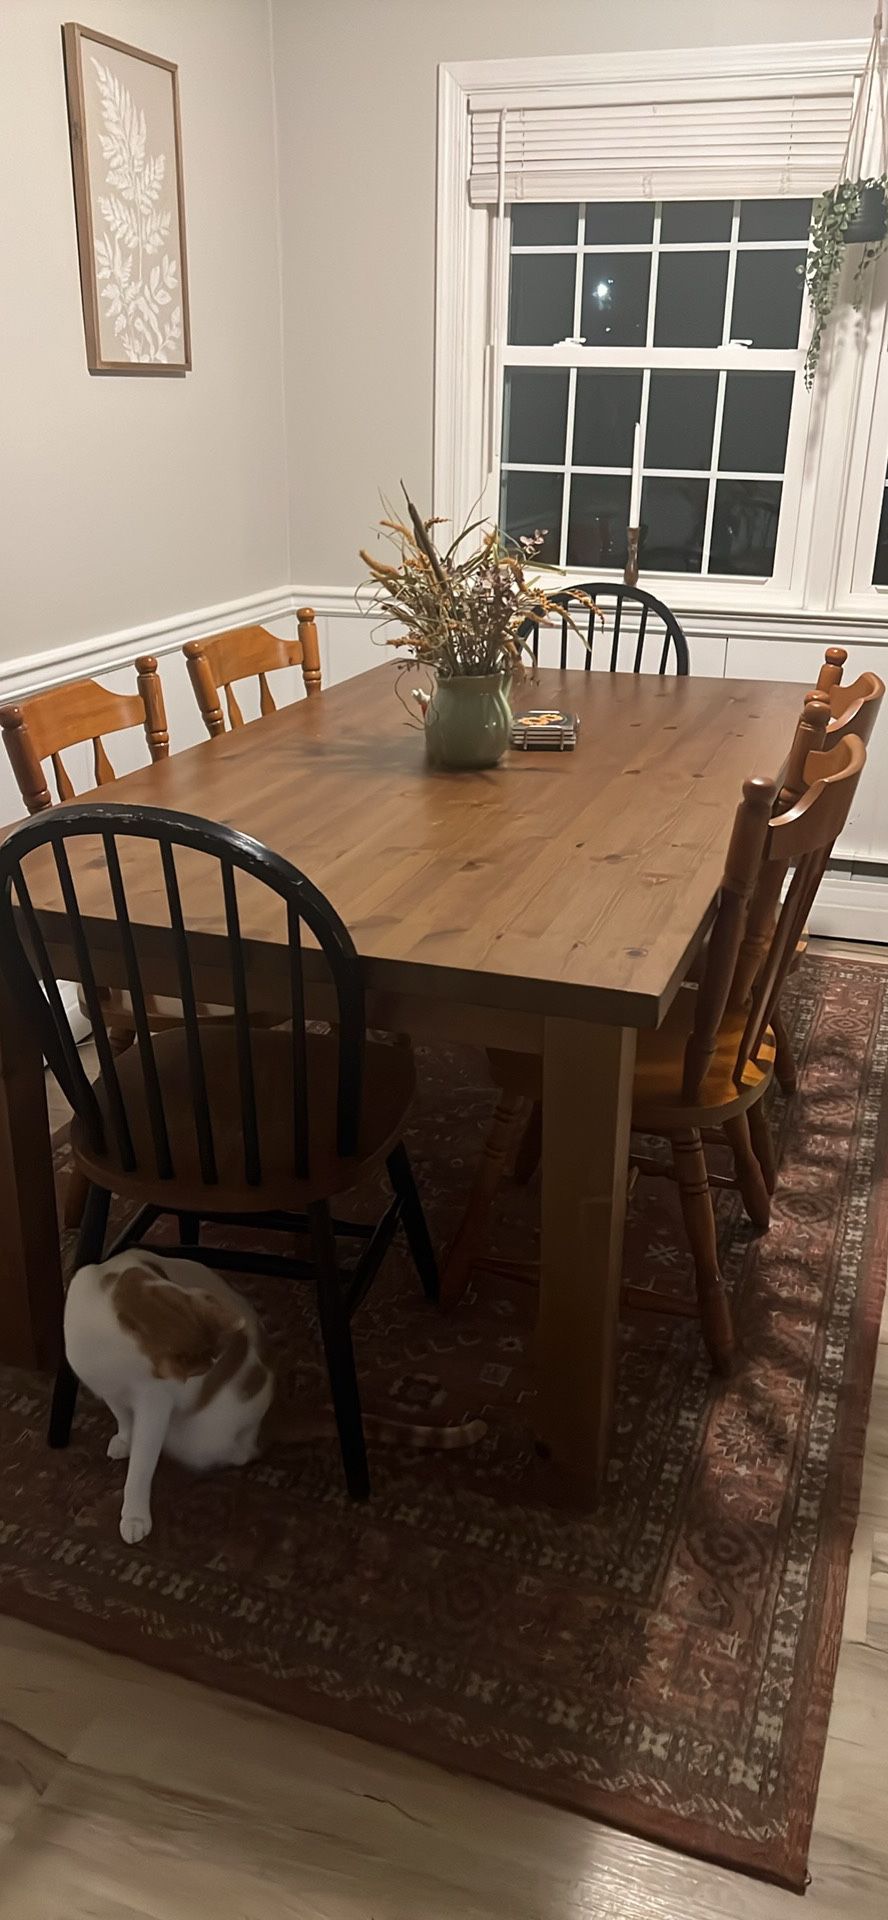 Wood Kitchen Table with 6 chairs 